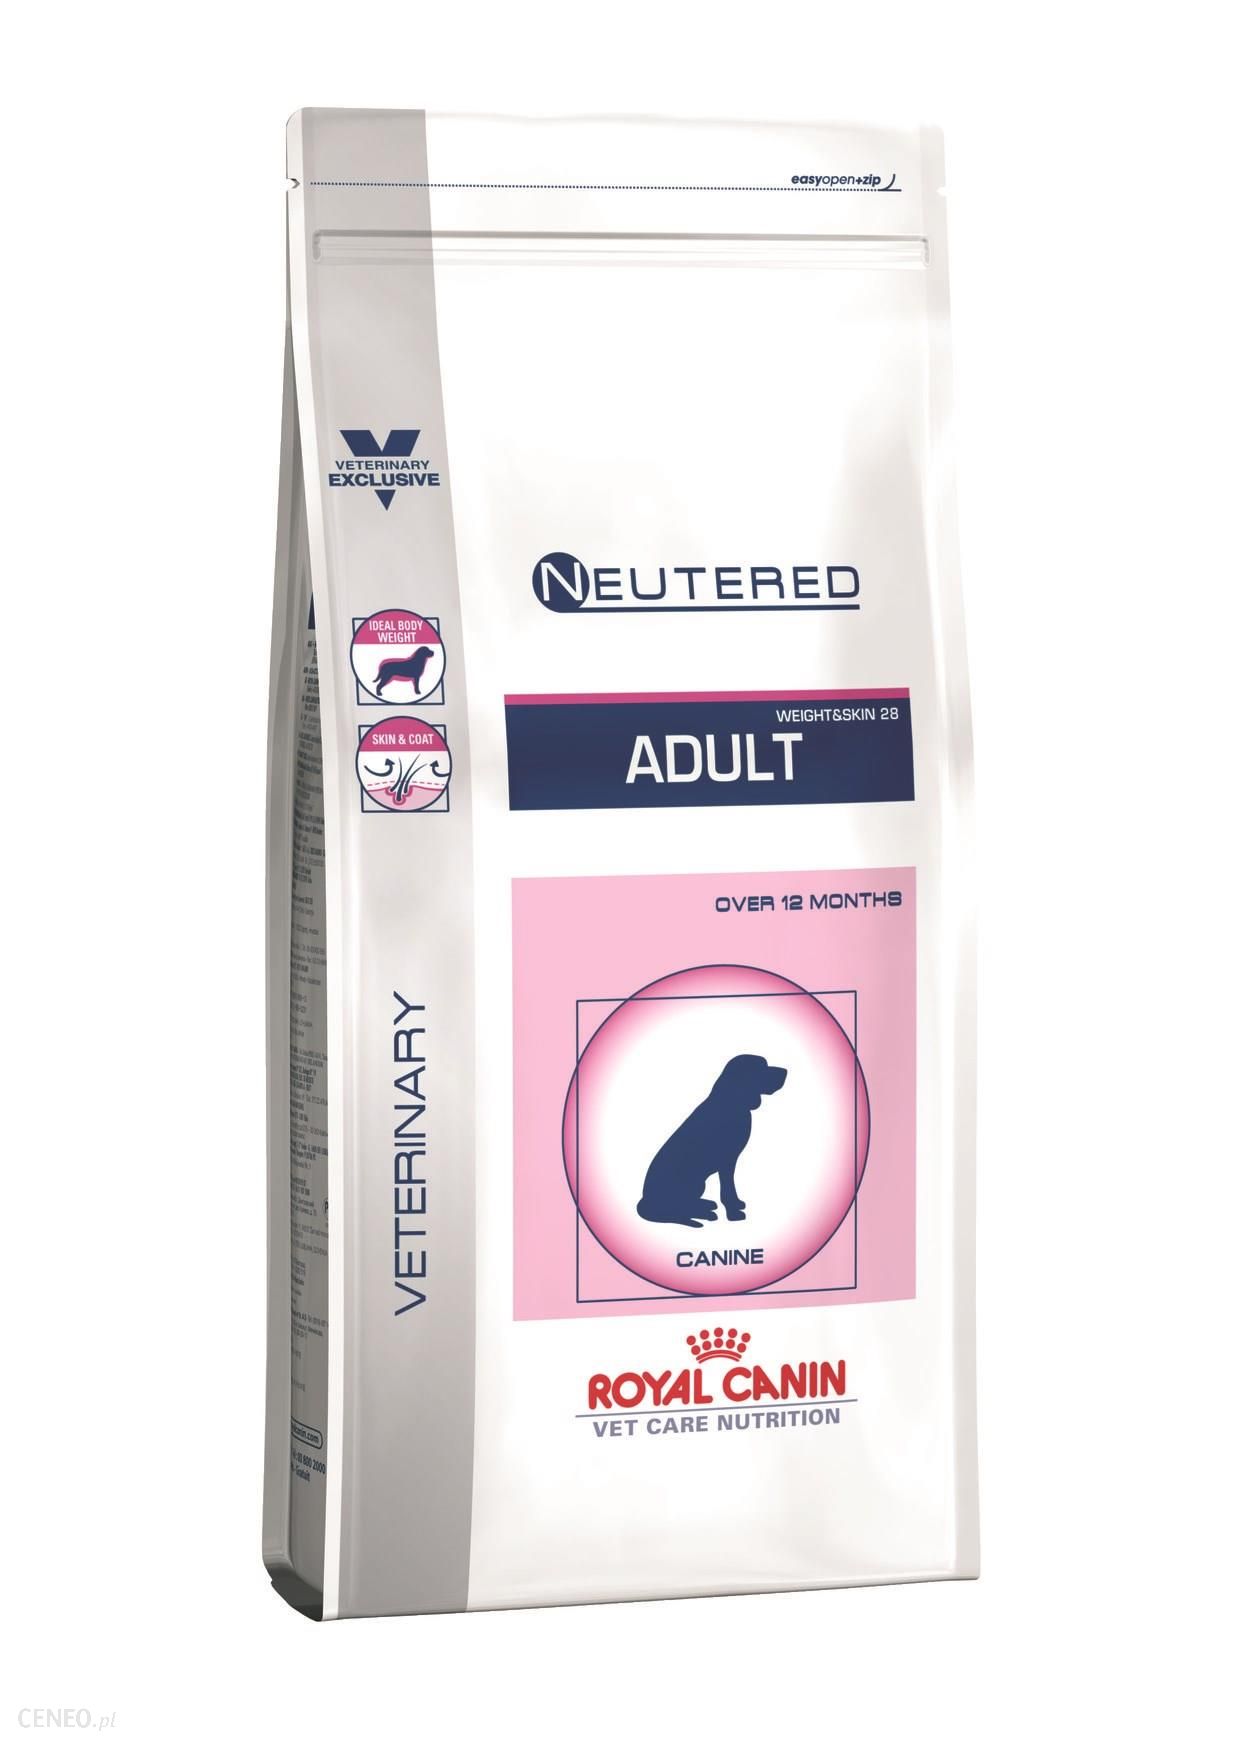 Royal Canin Veterinary Care Nutrition Neutered Adult Weight&Skin 28 2x10kg